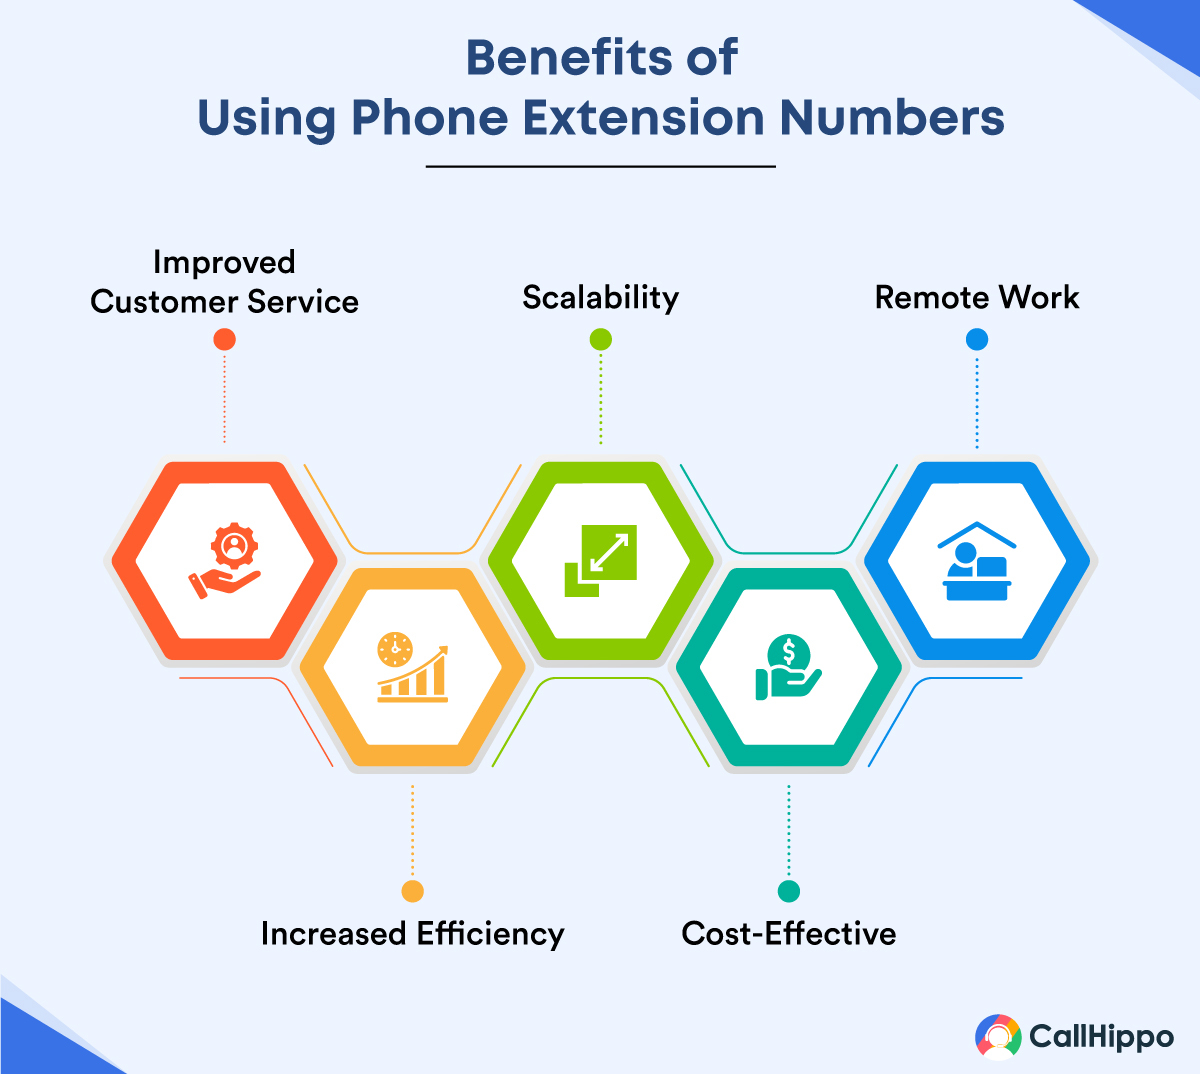 Benefits of Using Phone Extension Numbers